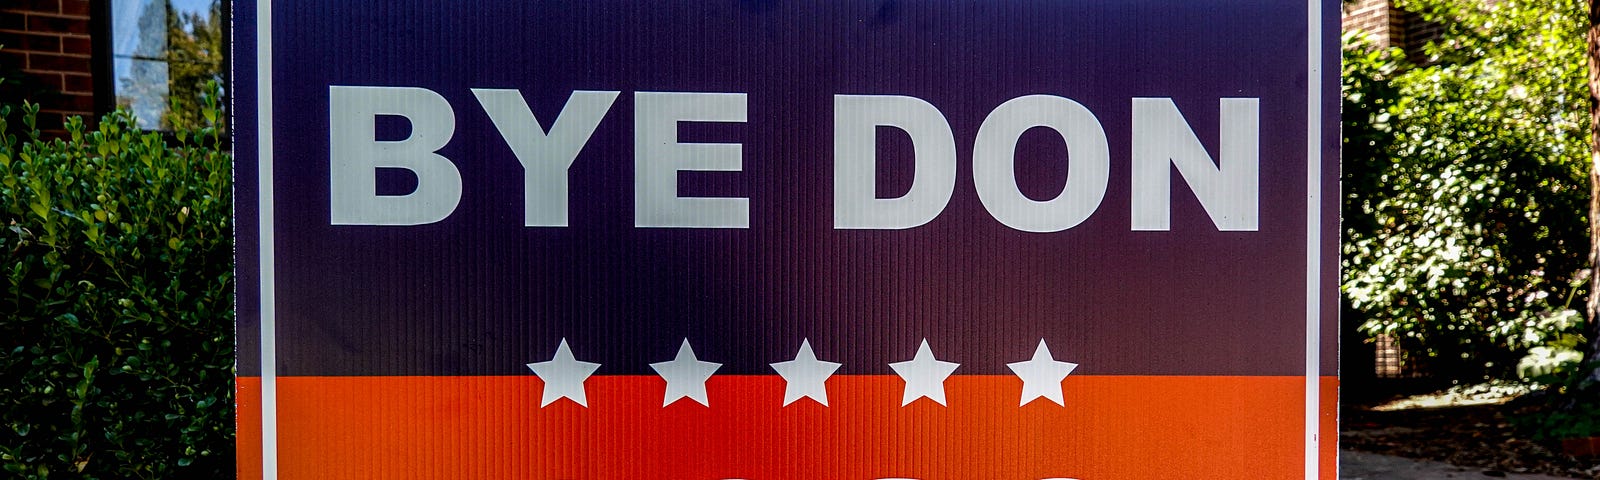 Yard sign that says “Bye Don 2020.”